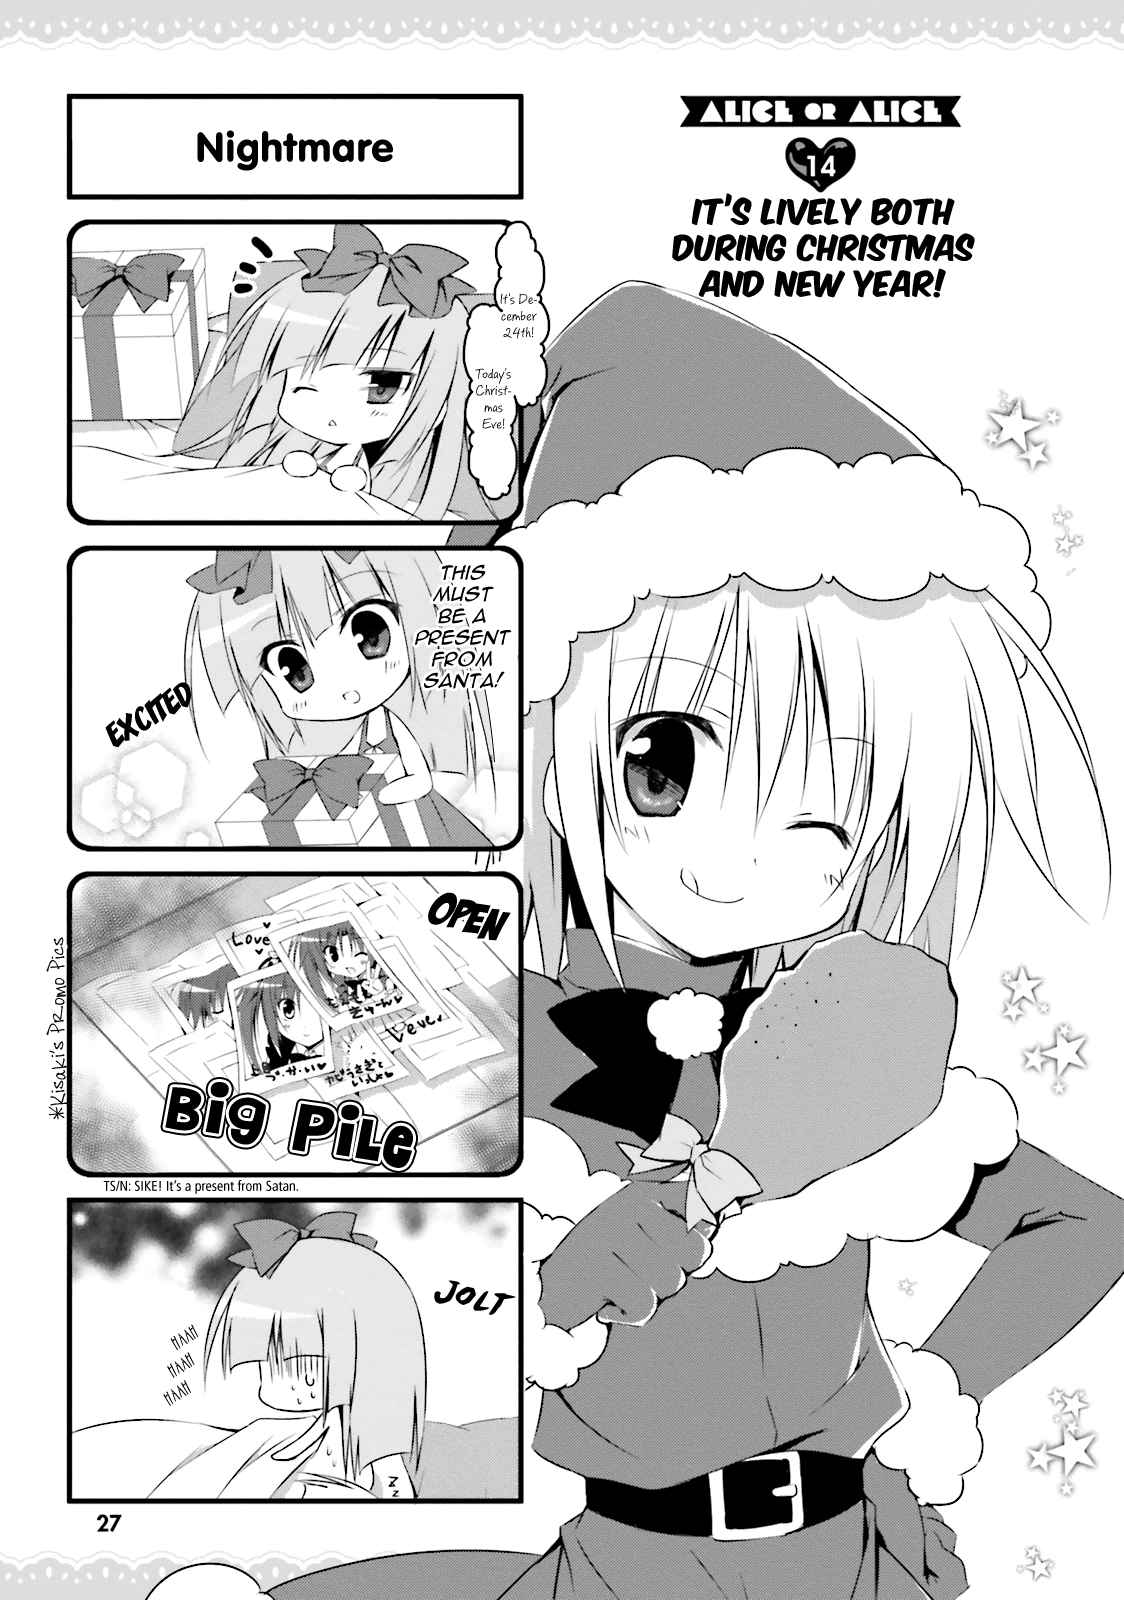 Alice or Alice Vol. 2 Ch. 14 It's lively both during Christmas and New Year!